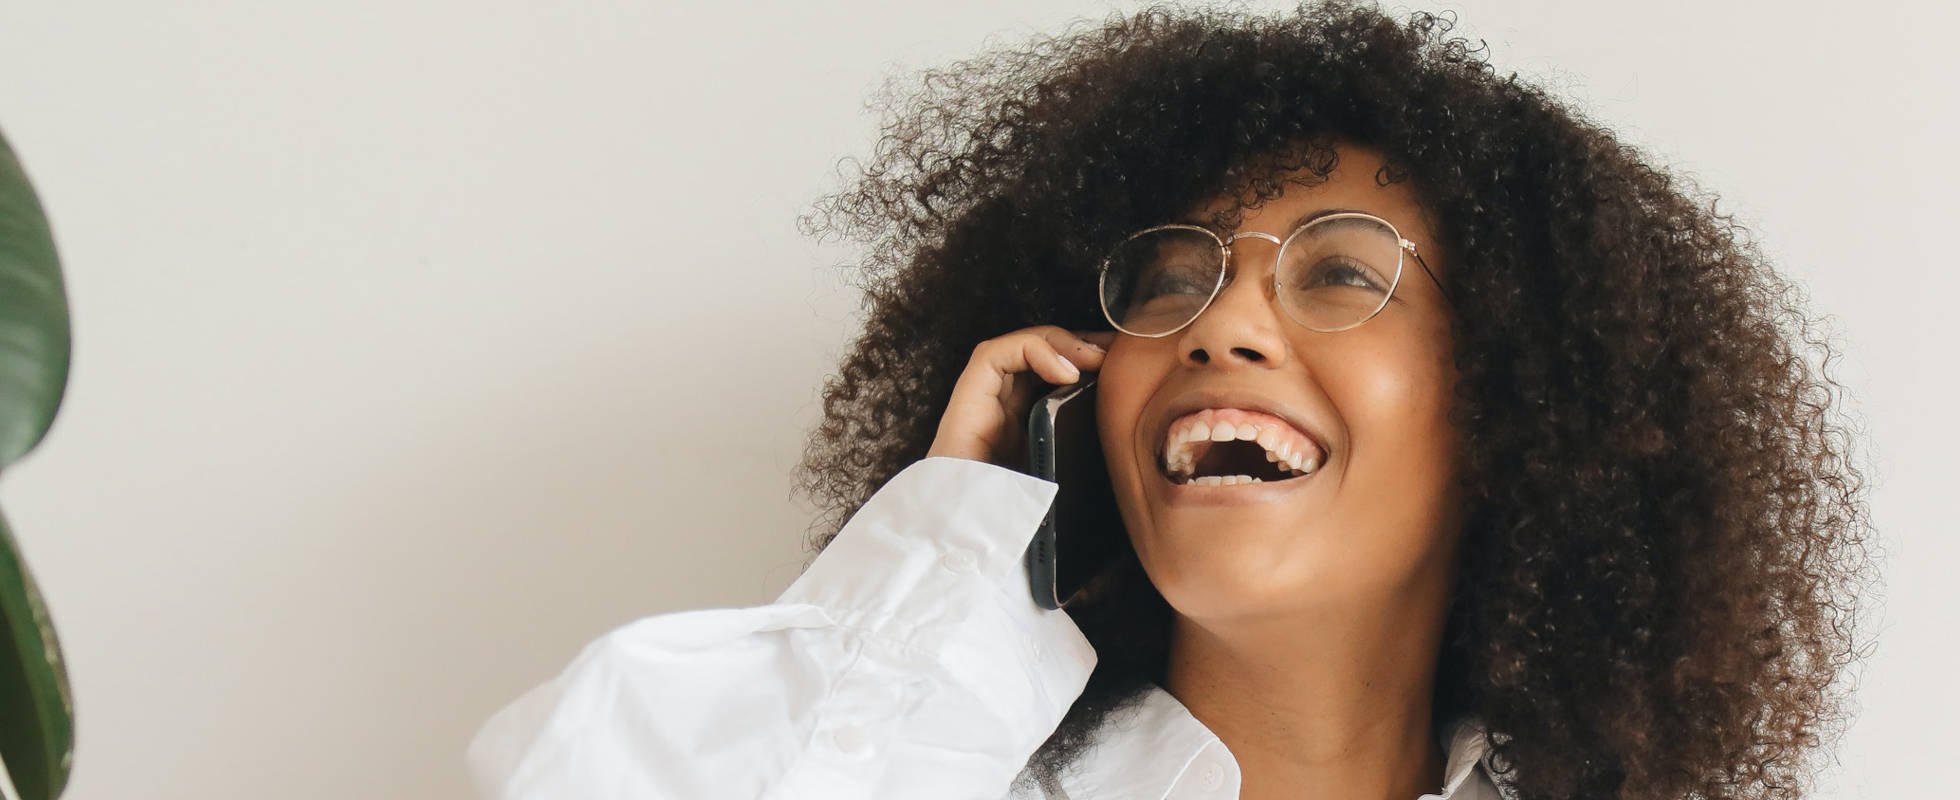 Smile-and-dial: How not to suck at sales calls